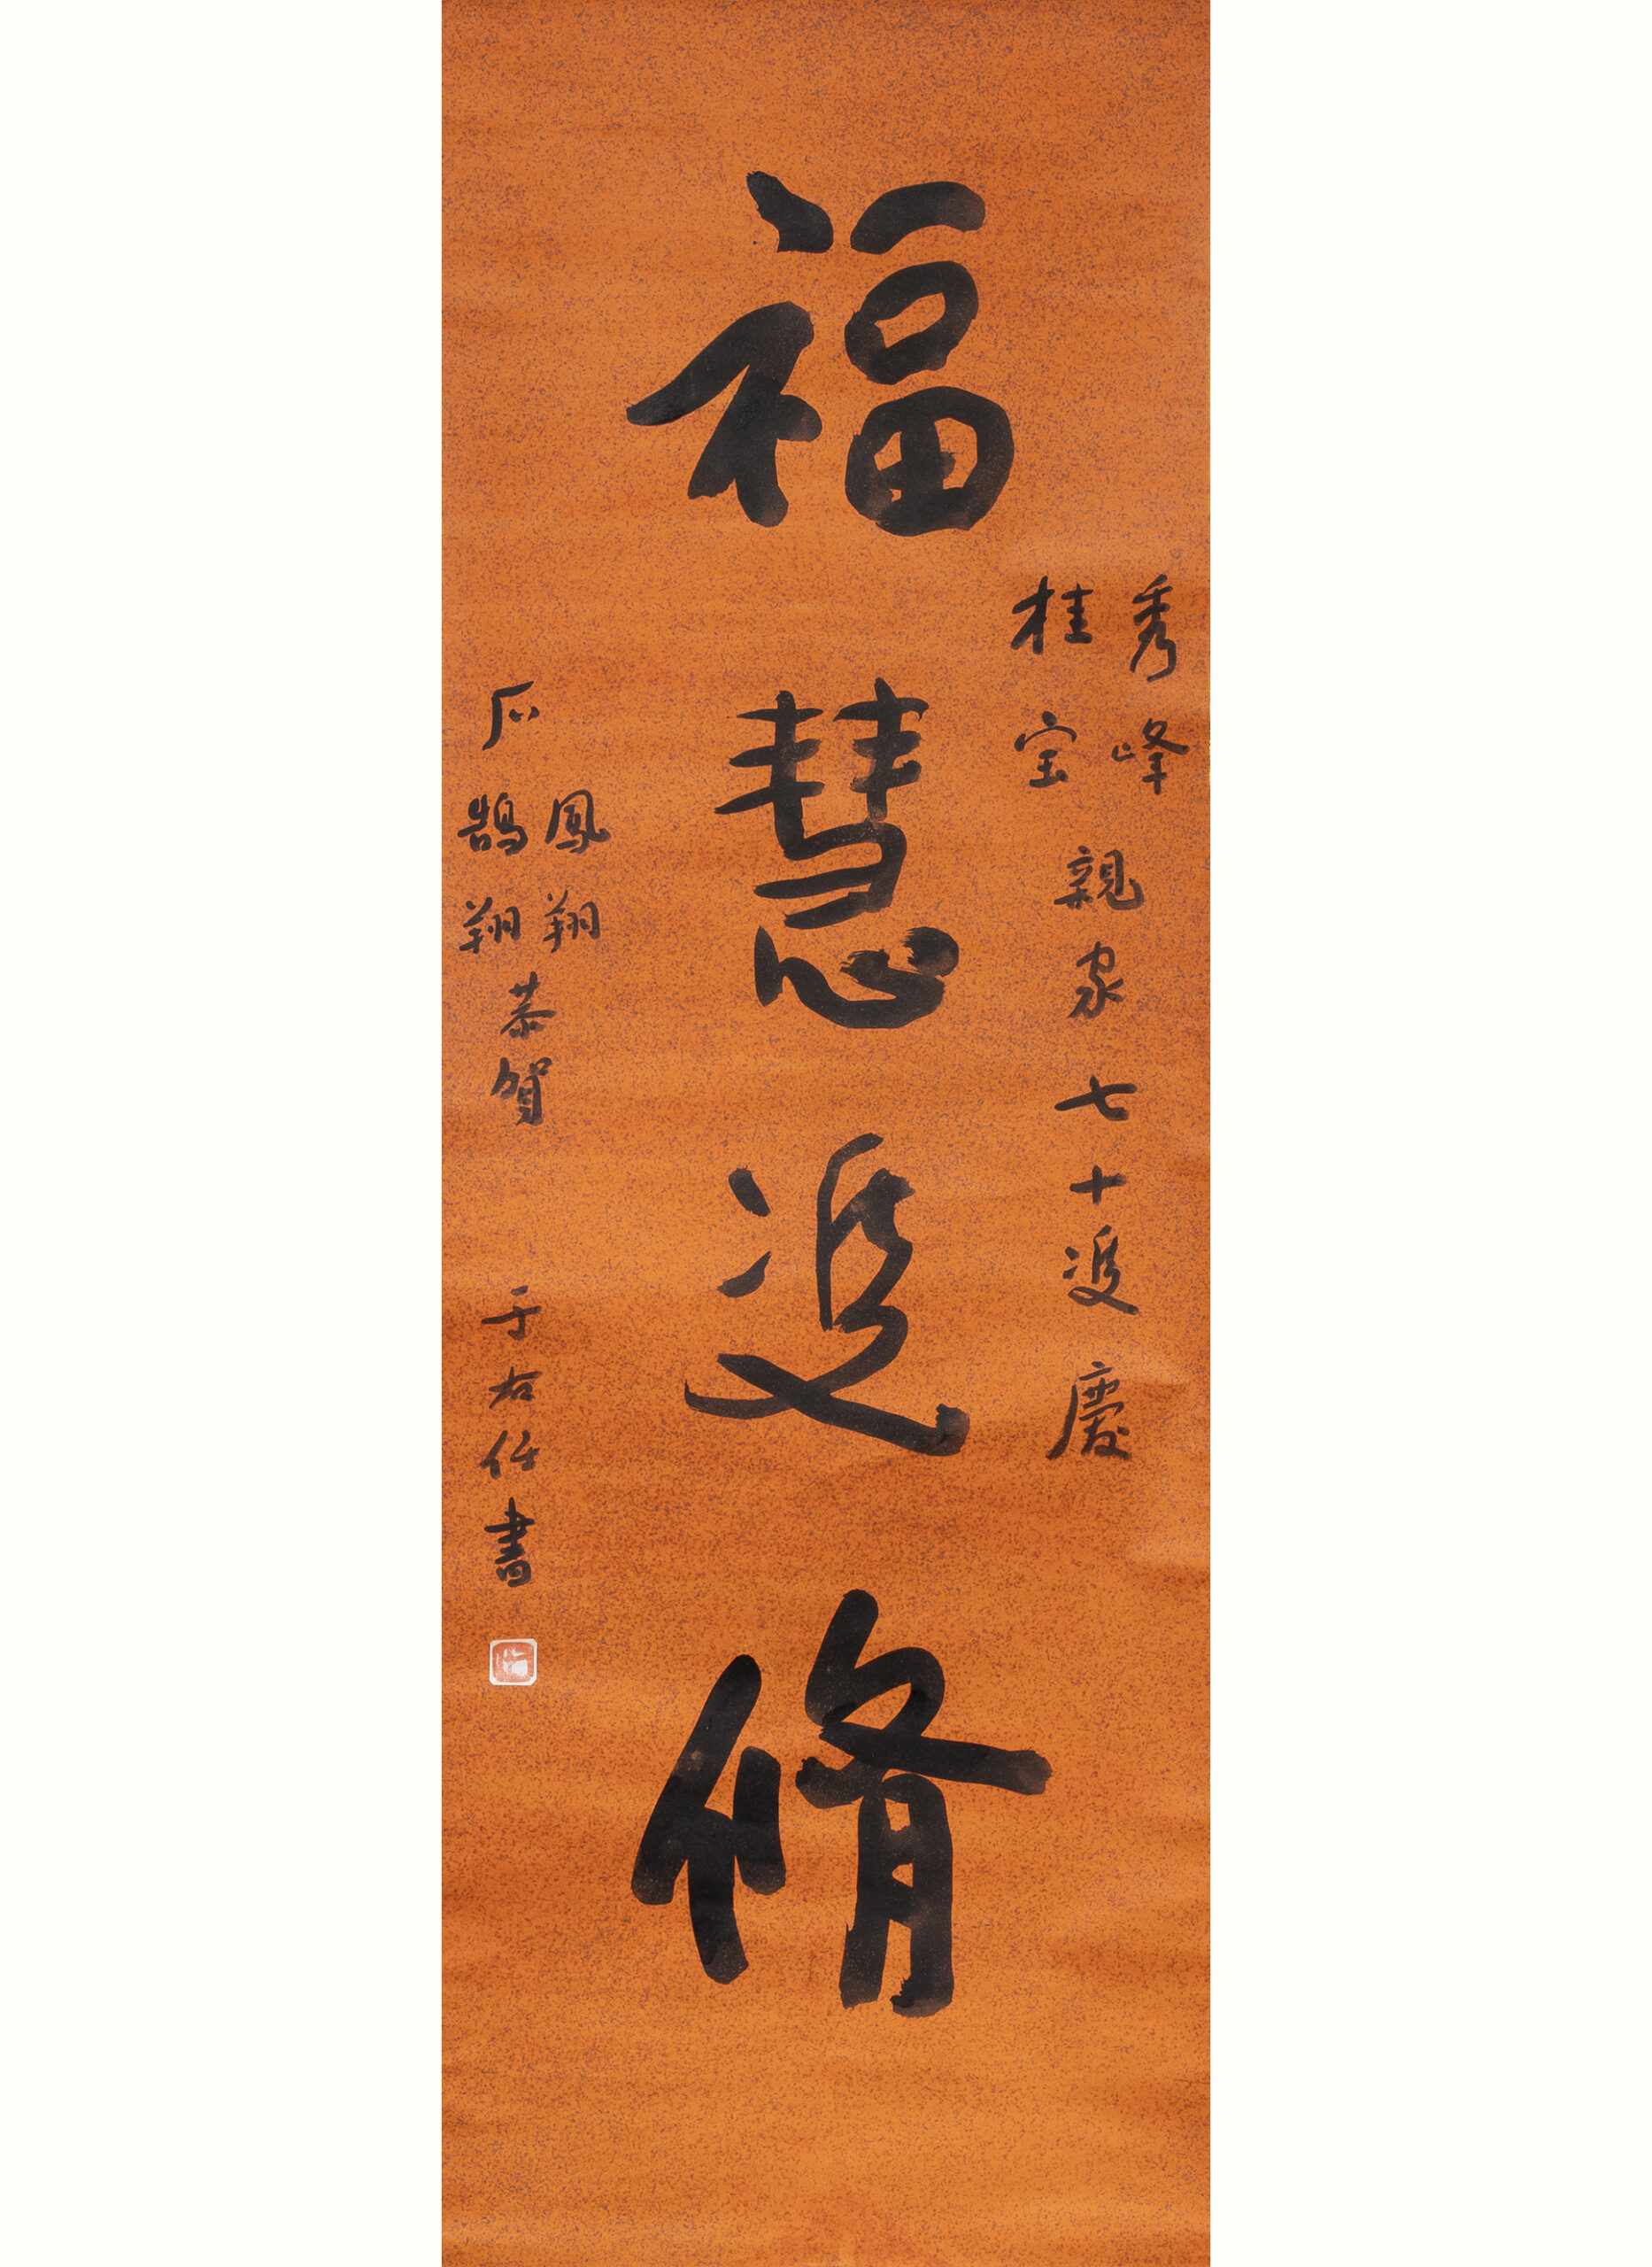 Yu Youren, Calligraphy, hanging scroll, ink on paper, 39.875″ x 13.75″.